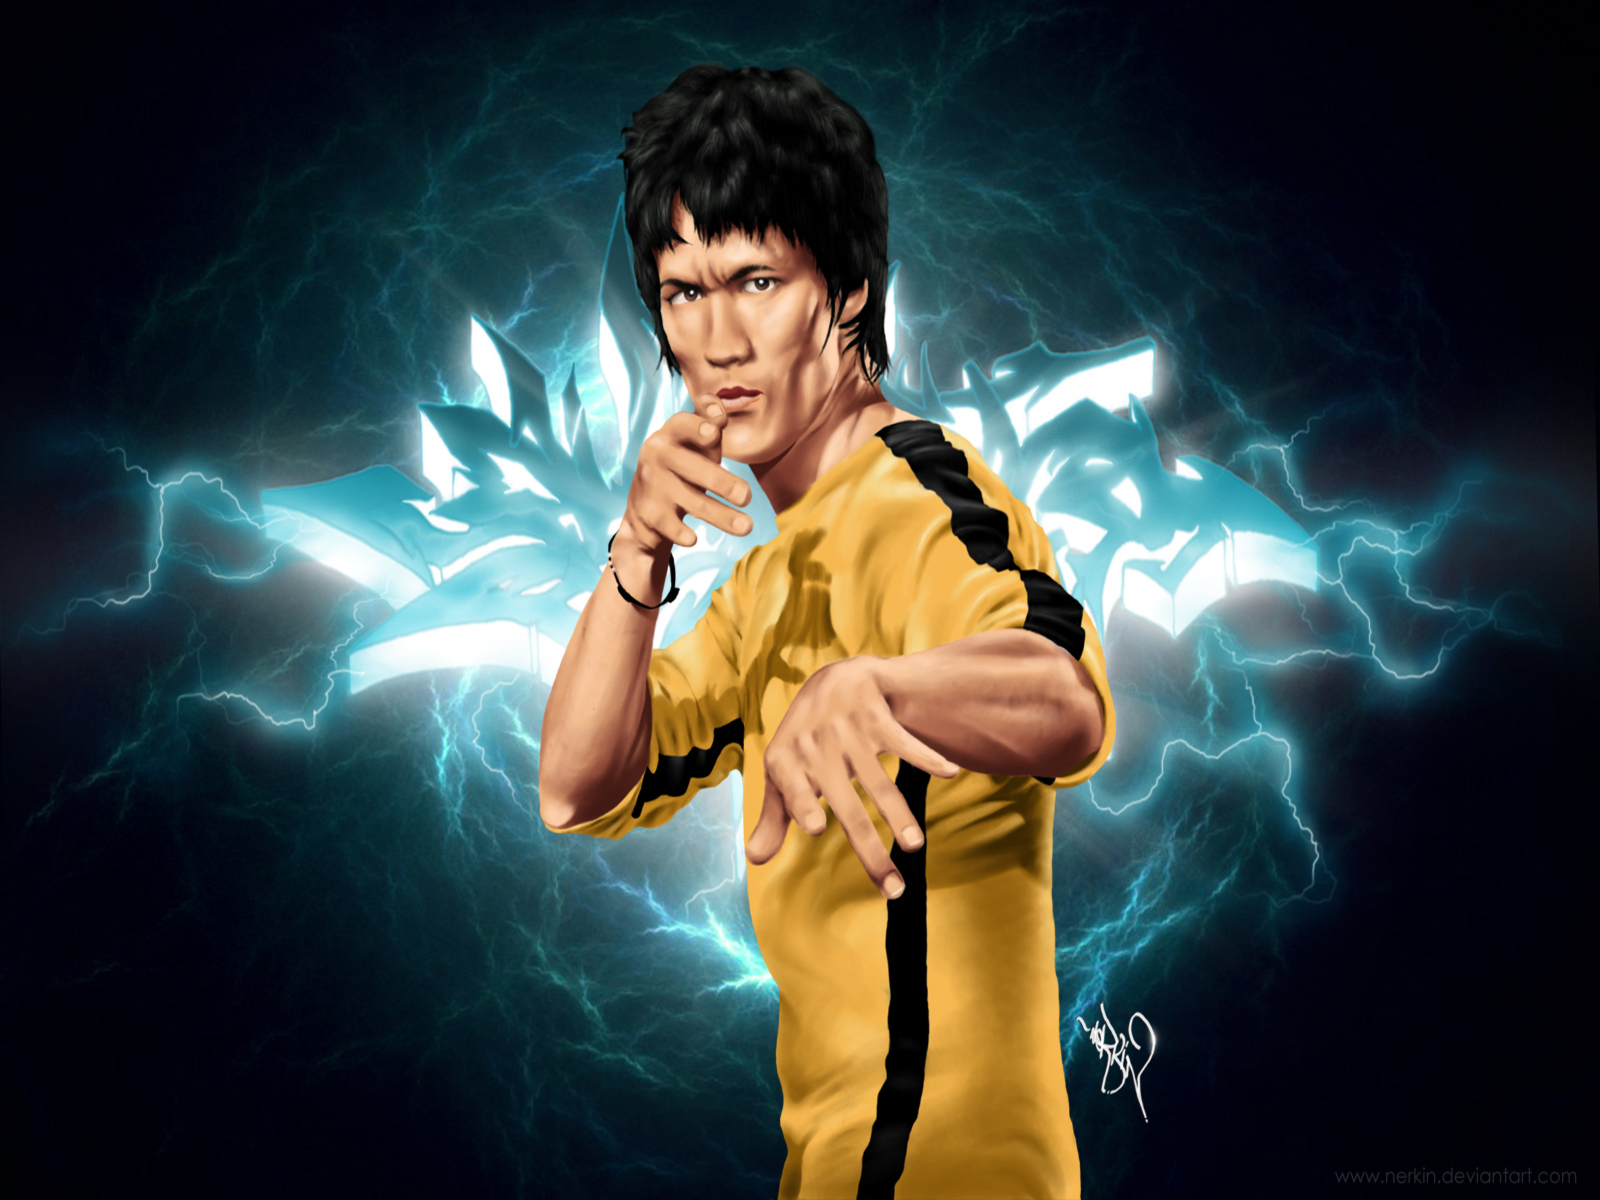 bruce lee hd wallpaper,performance,kung fu,graphic design